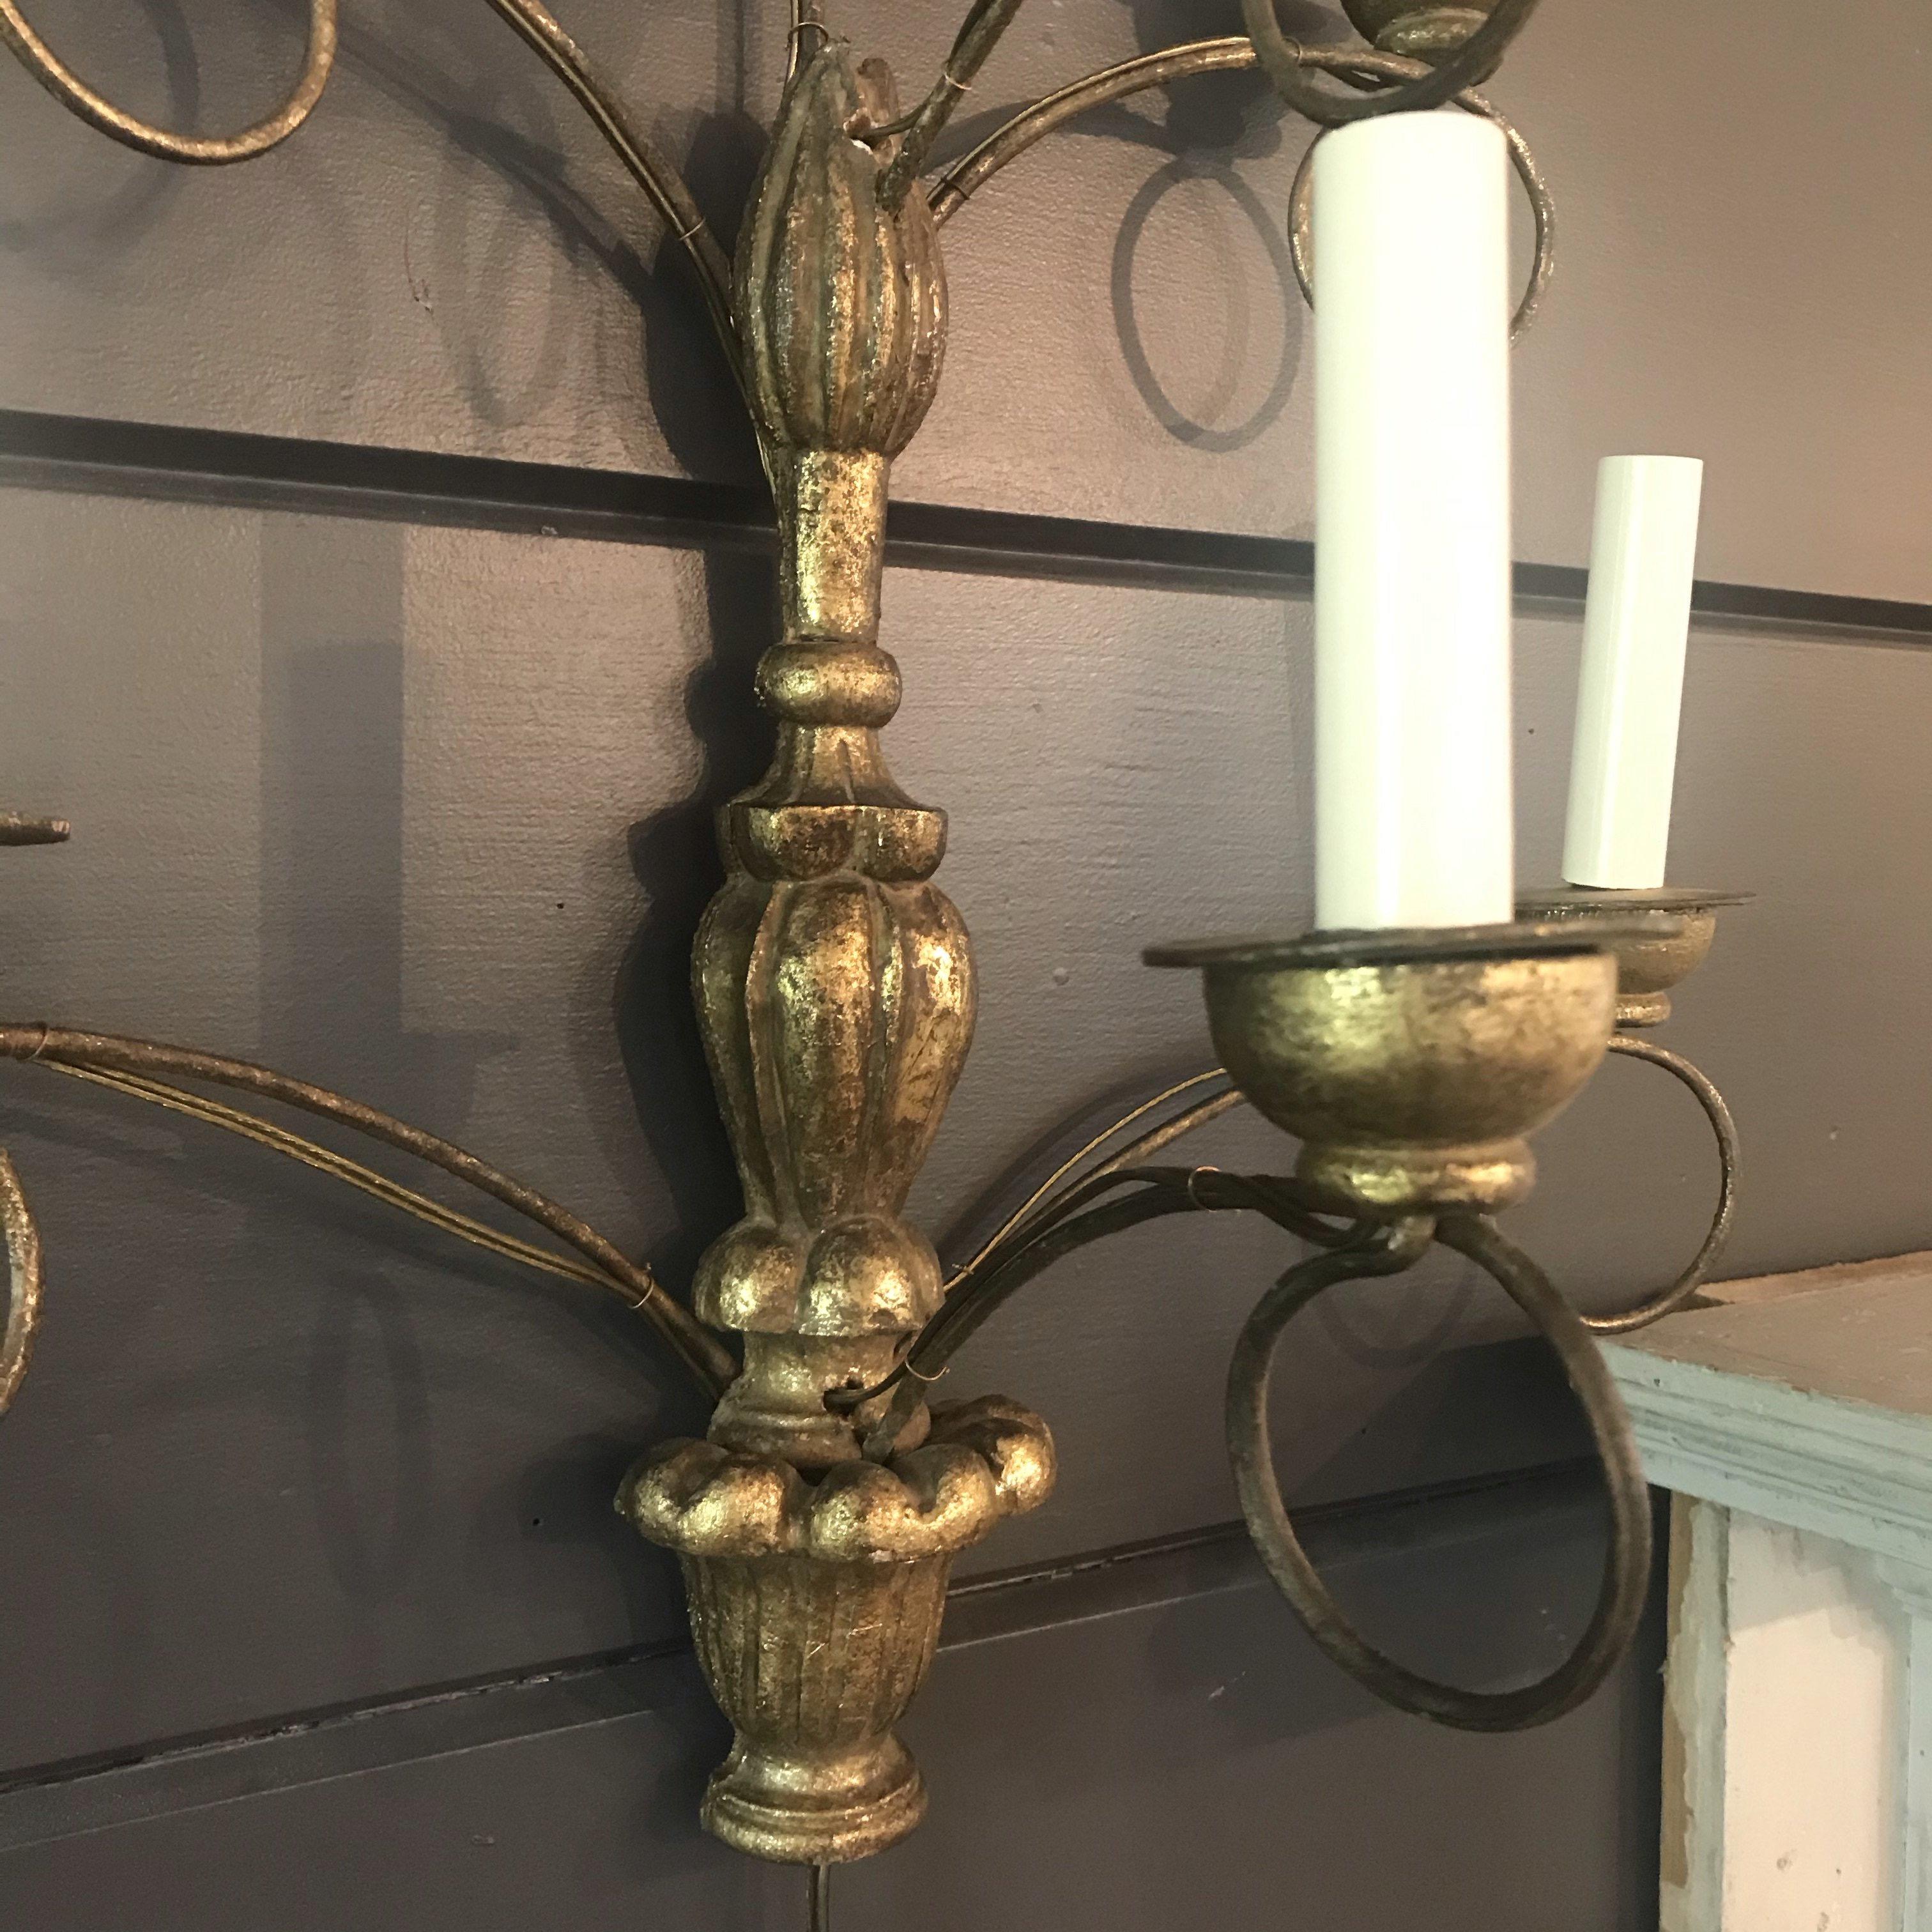 A large elegant pair of French water gilt gold carved sconces with beautiful graduated urn design, with metal scrolled arms holding seven candle lights. Bought in France and rewired to US standards.
 
Measures: H 29” x W 18” x D 9.5”
#5067.
  